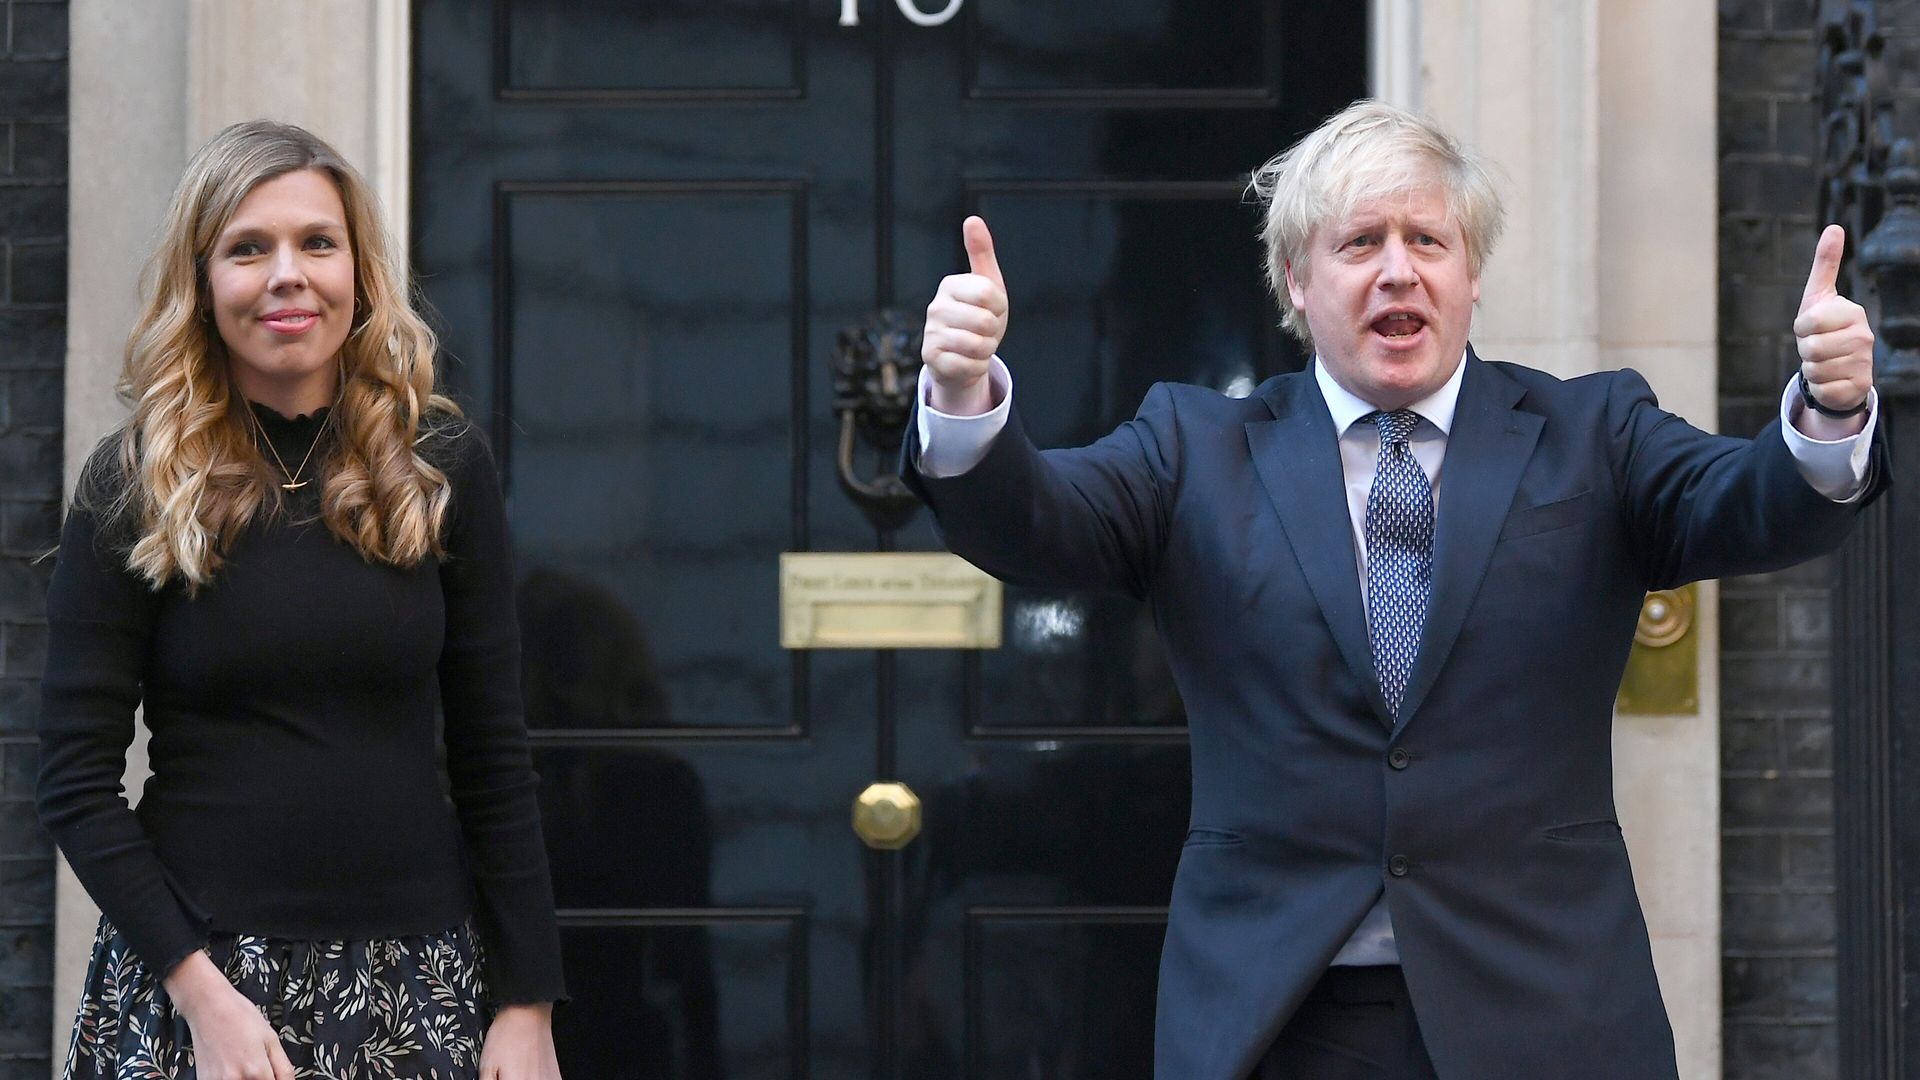 Prime minister Boris Johnson and his partner Carrie Symonds, stand in Downing Street, London - Credit: PA